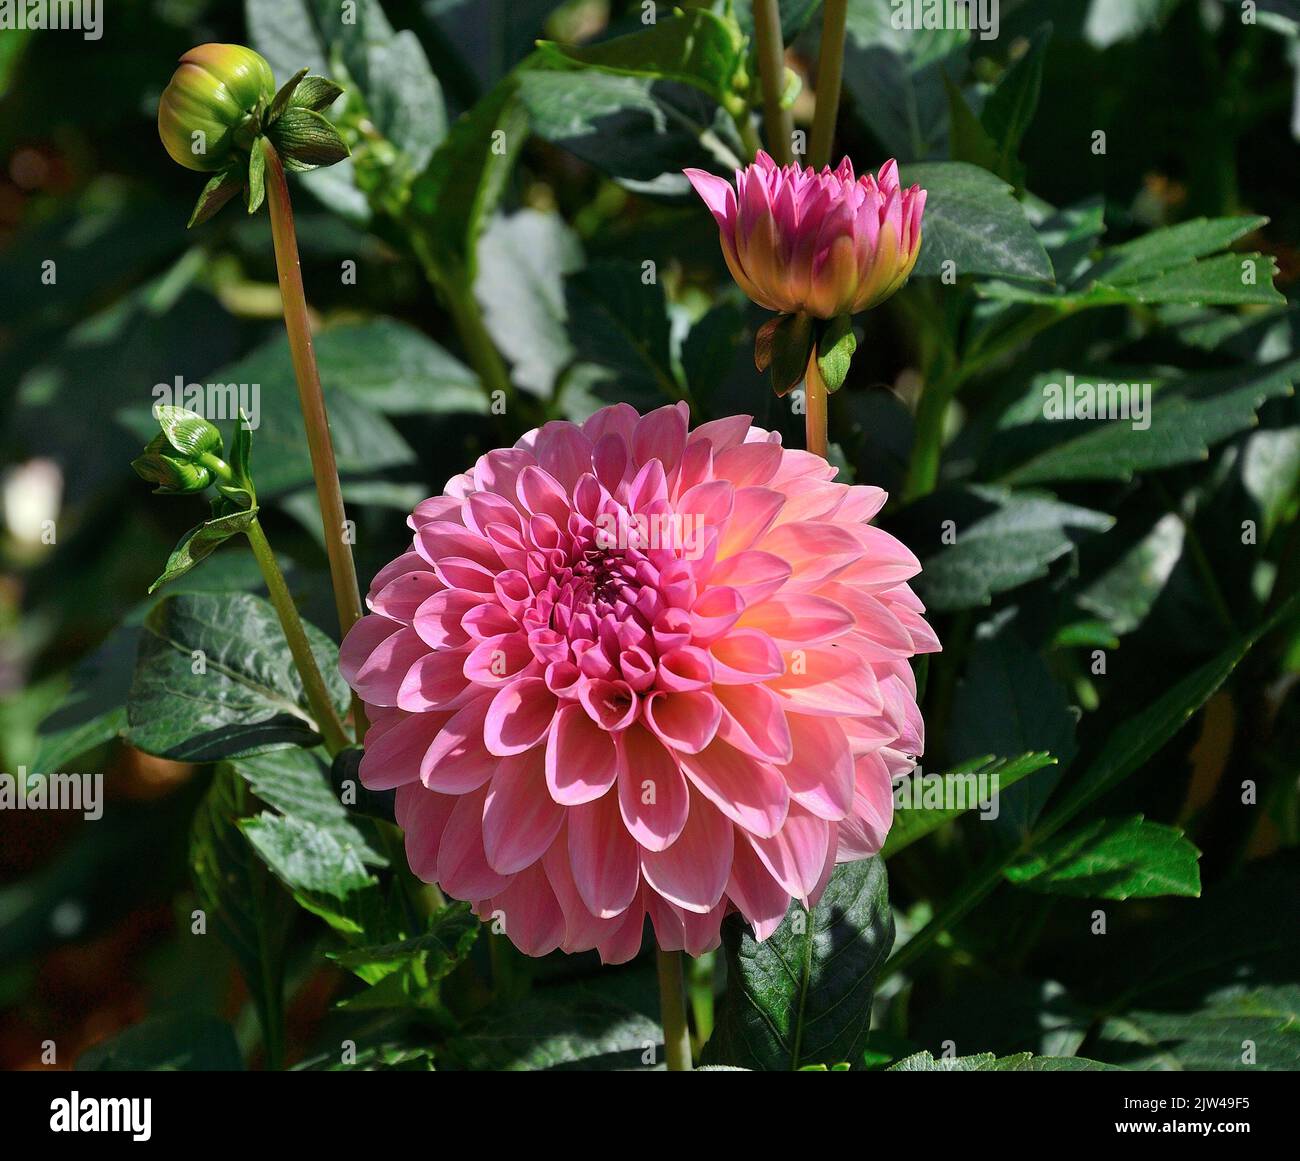 Dahlia pompony variety Jowey Winnie in the garden. Single flower with salmon colored petals and yellow center, close up. Delicate autumn flower, selec Stock Photo